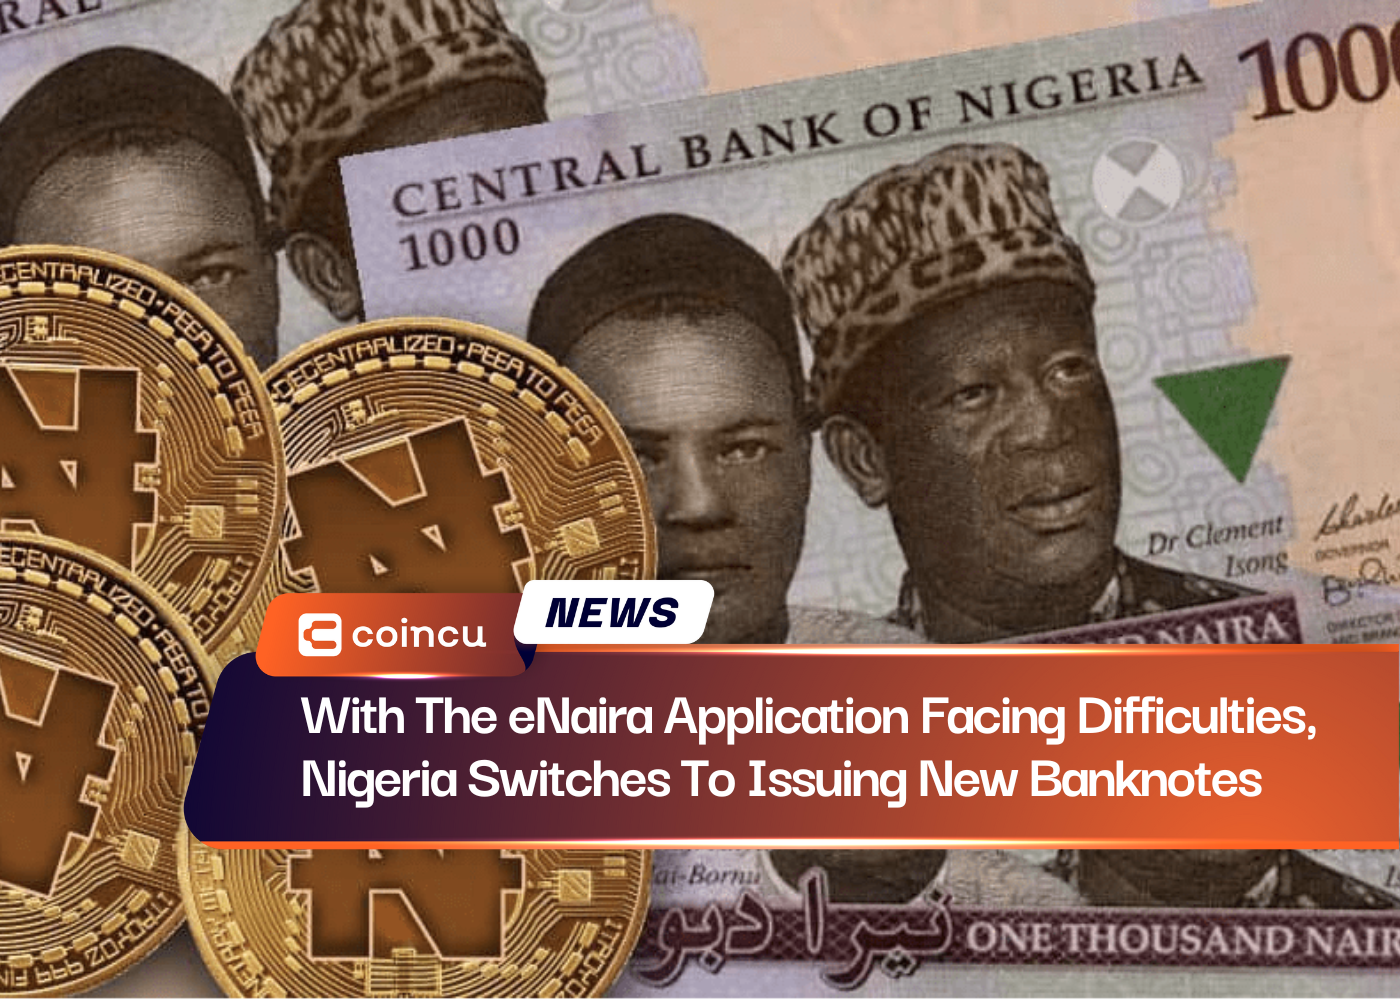 With The eNaira Application Facing Difficulties, Nigeria Switches To Issuing New Banknotes